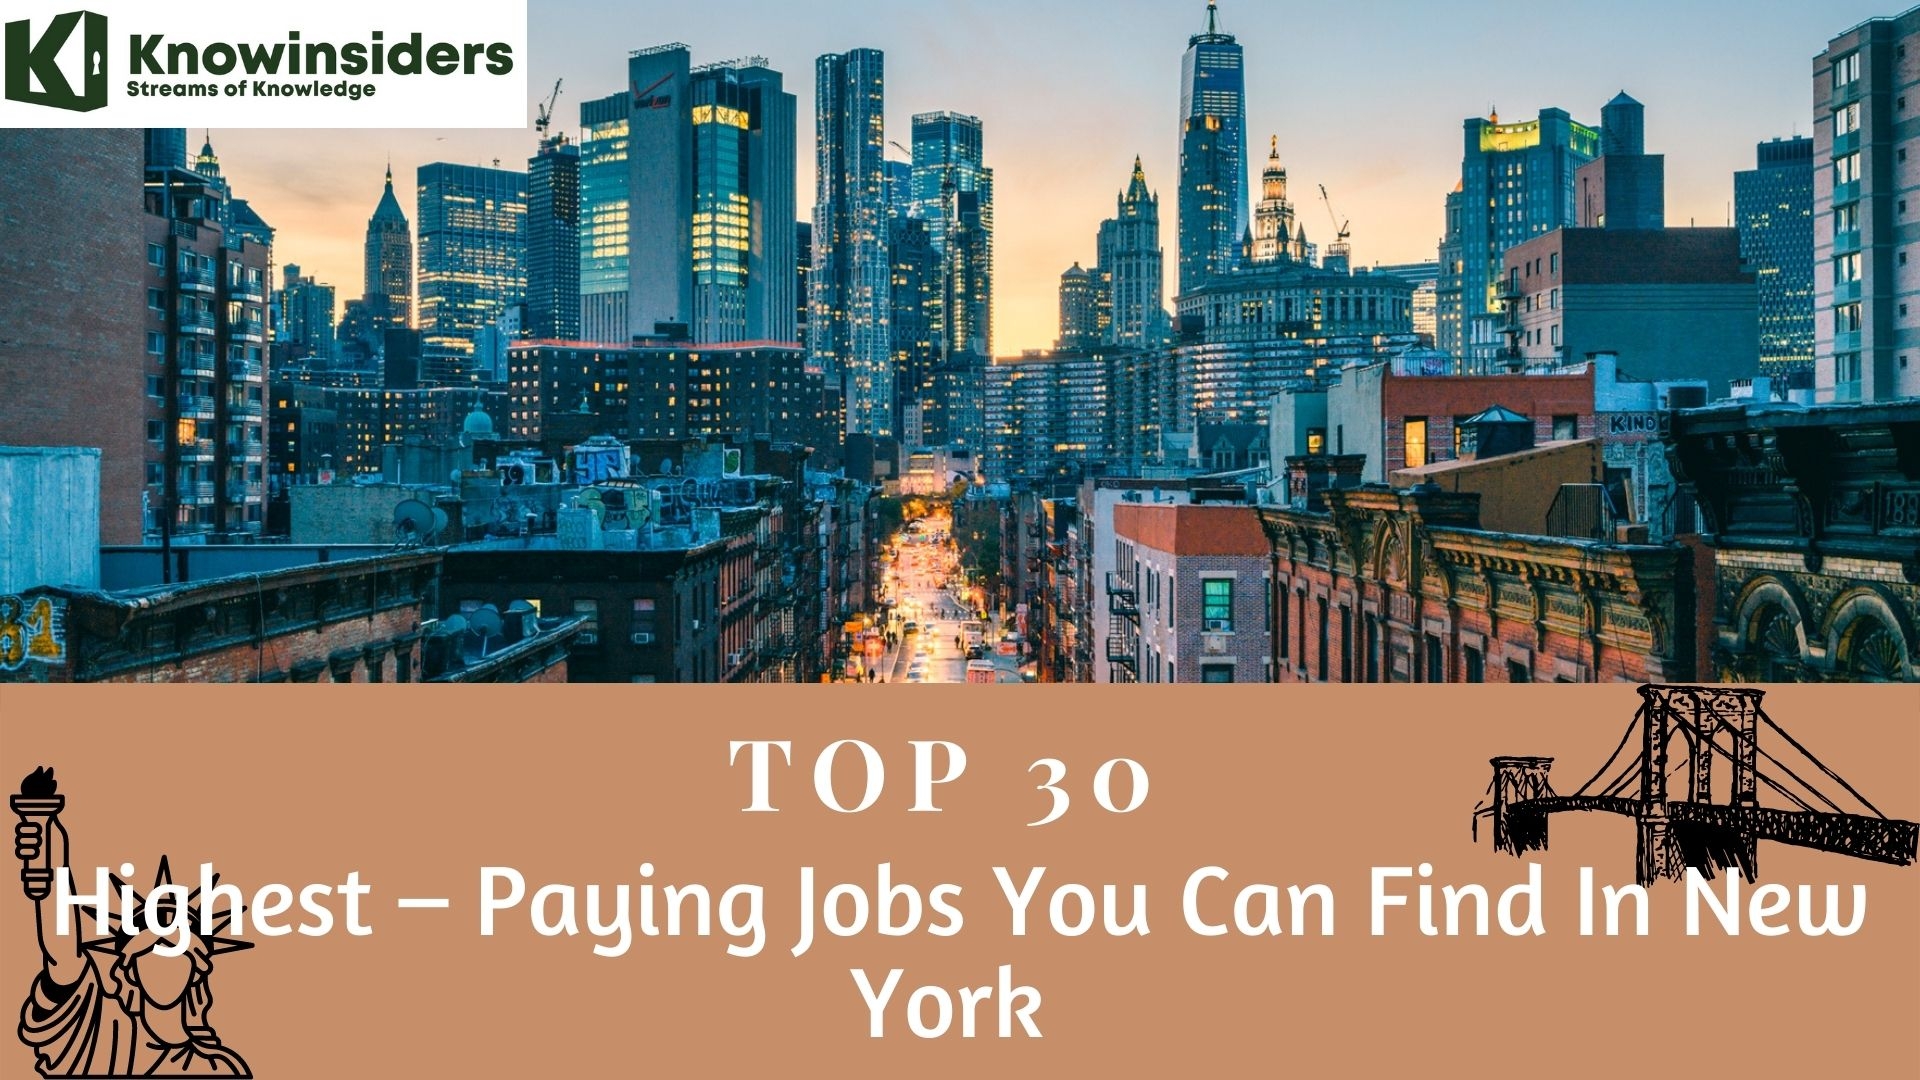 Top 30 Highest – Paying Jobs You Can Find In New York 	